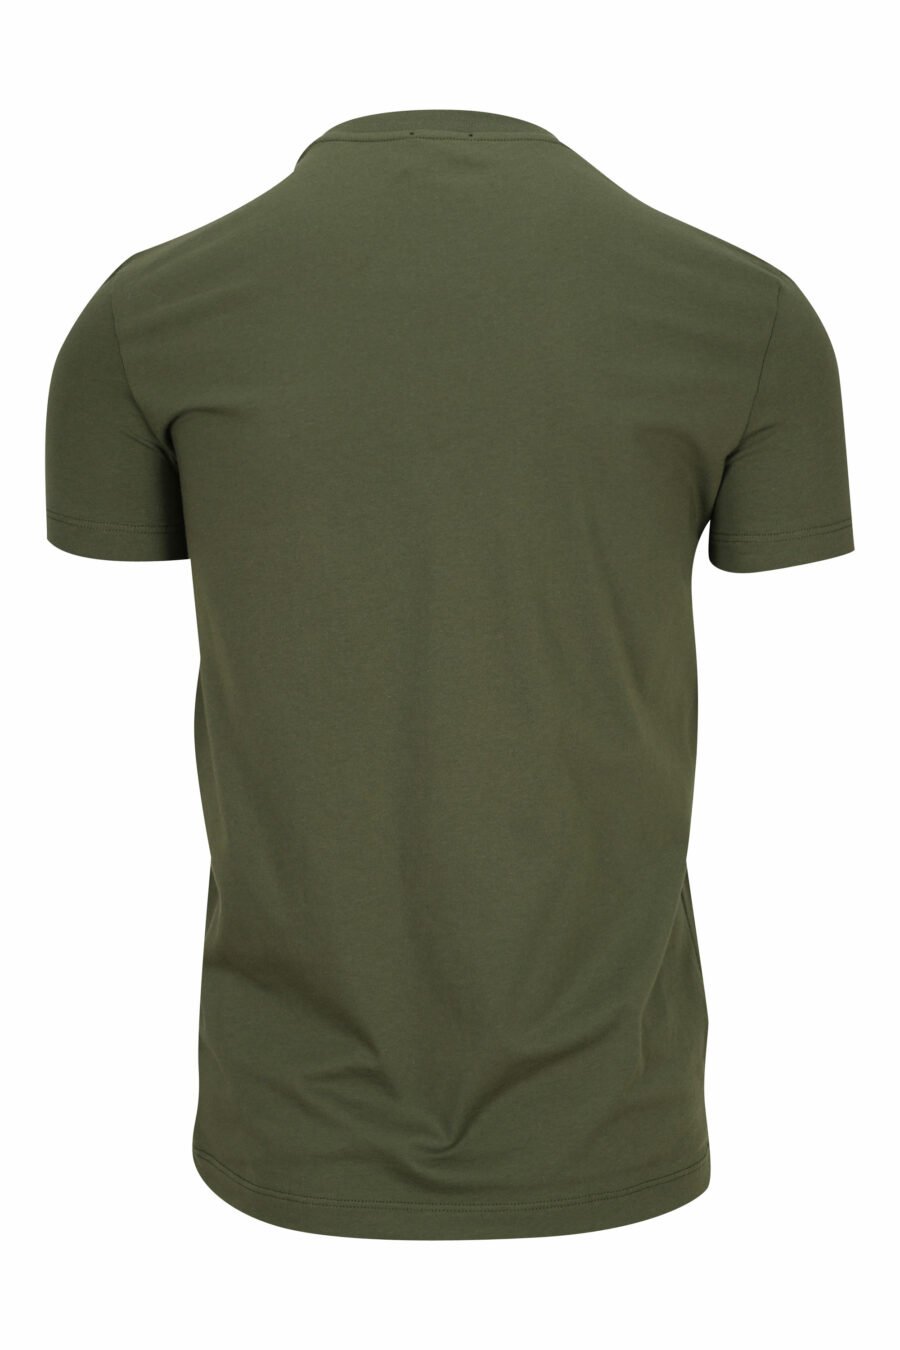 Military green T-shirt with white underwear minilogue - 8032674811622 1